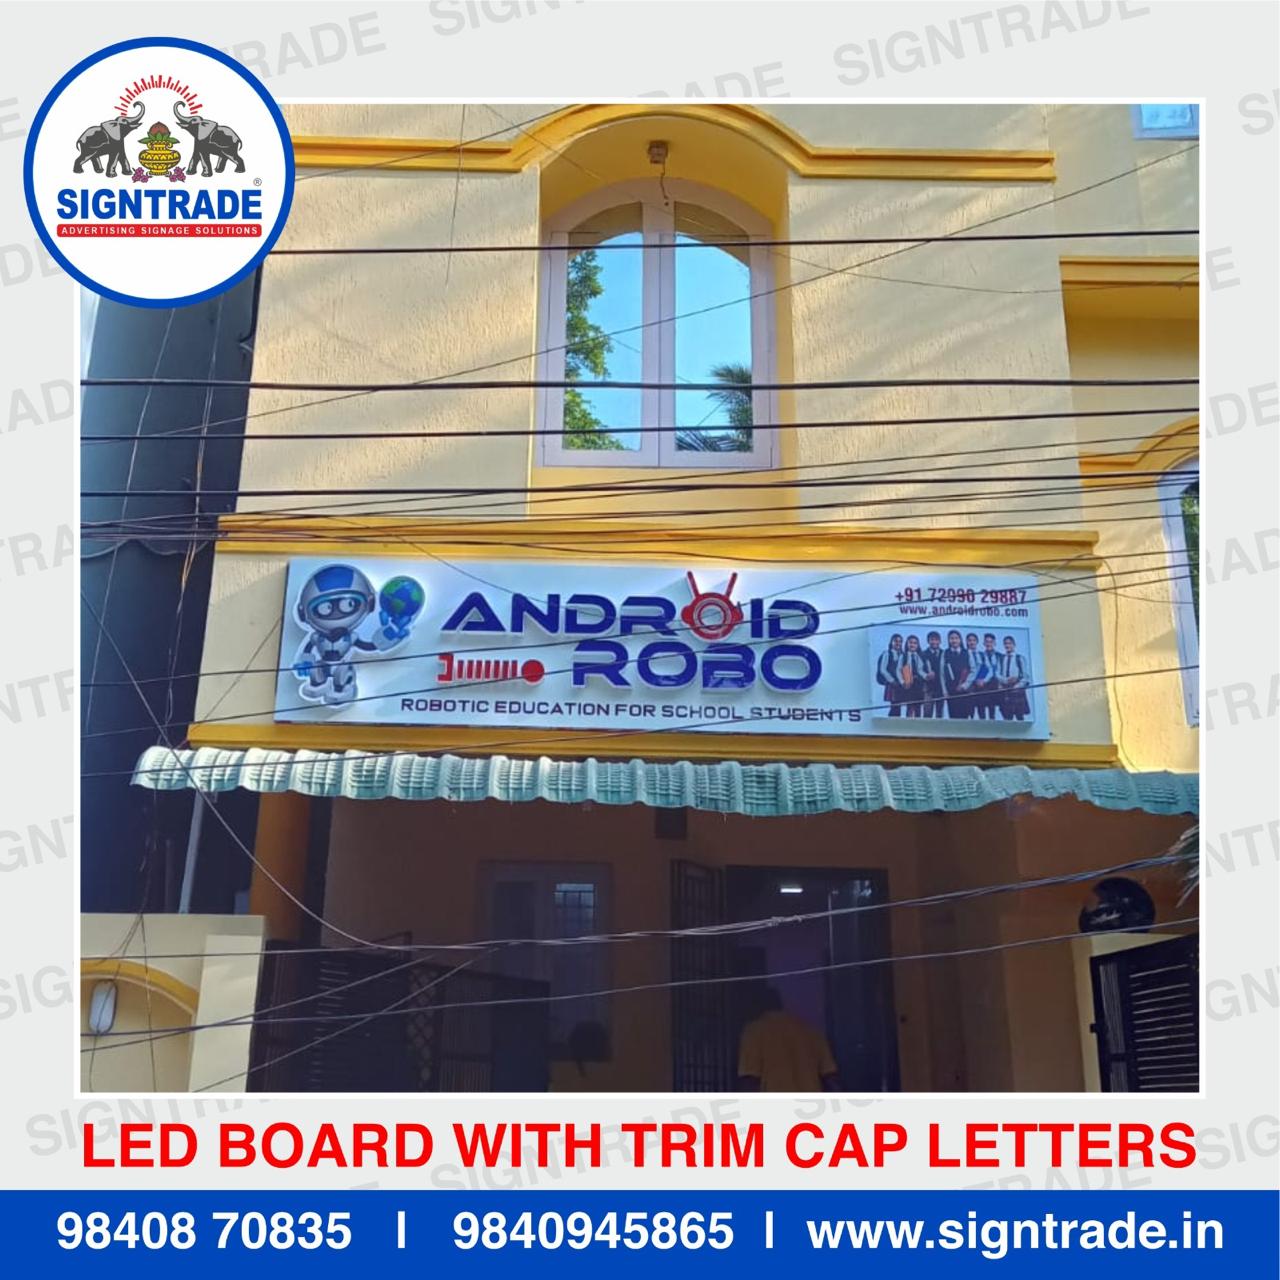 LED Boards with Trim Cap Letters in Chennai